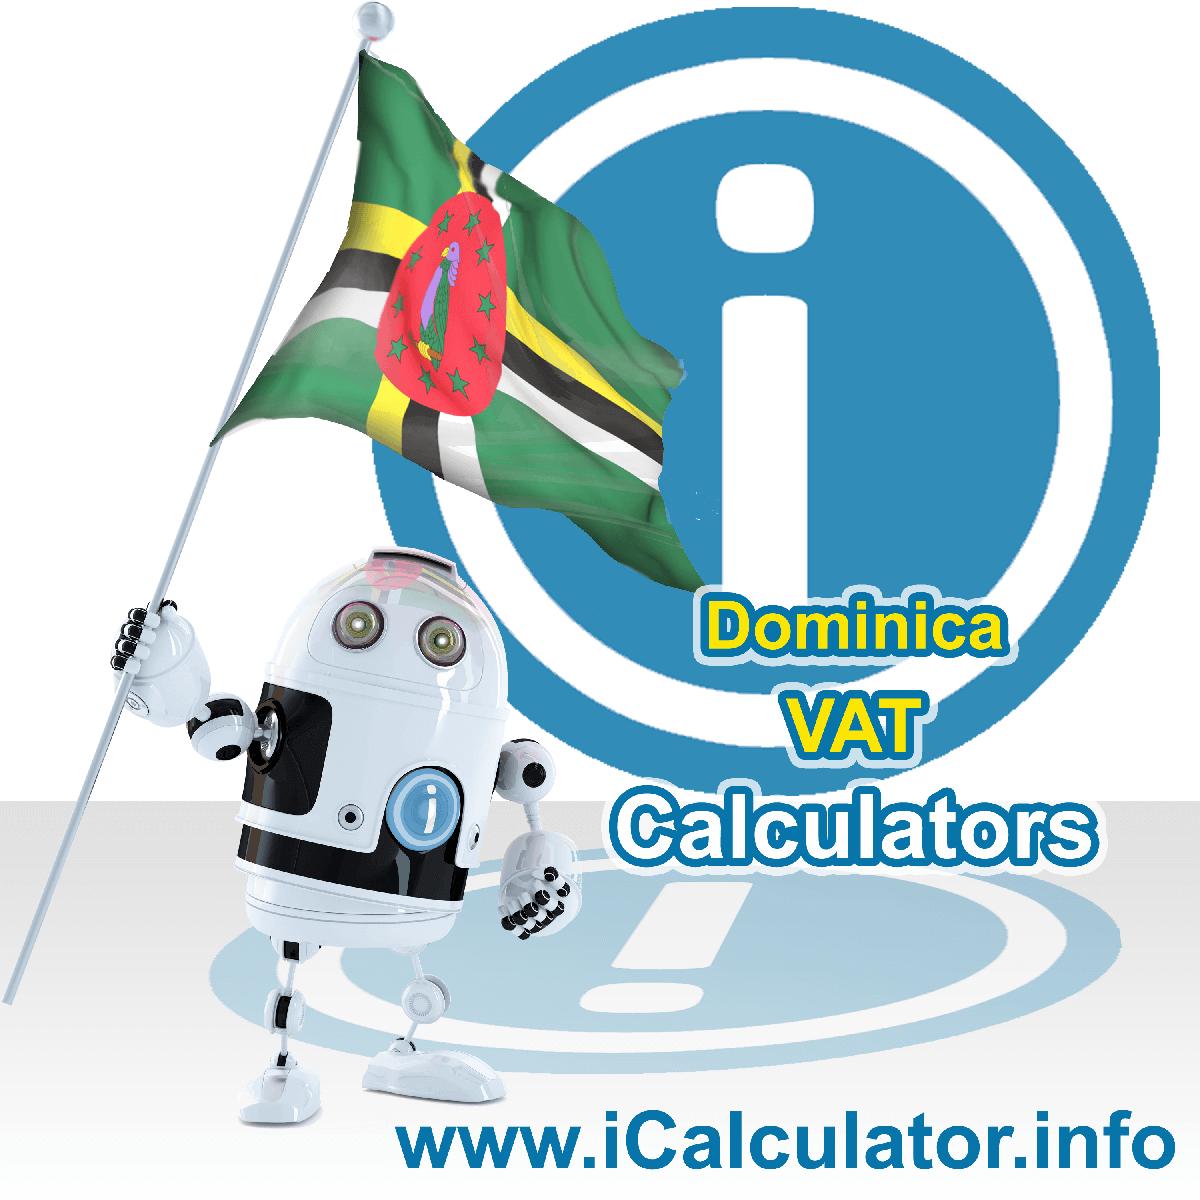 Dominica VAT Calculator. This image shows the Dominica flag and information relating to the VAT formula used for calculating Value Added Tax in Dominica using the Dominica VAT Calculator in 2023